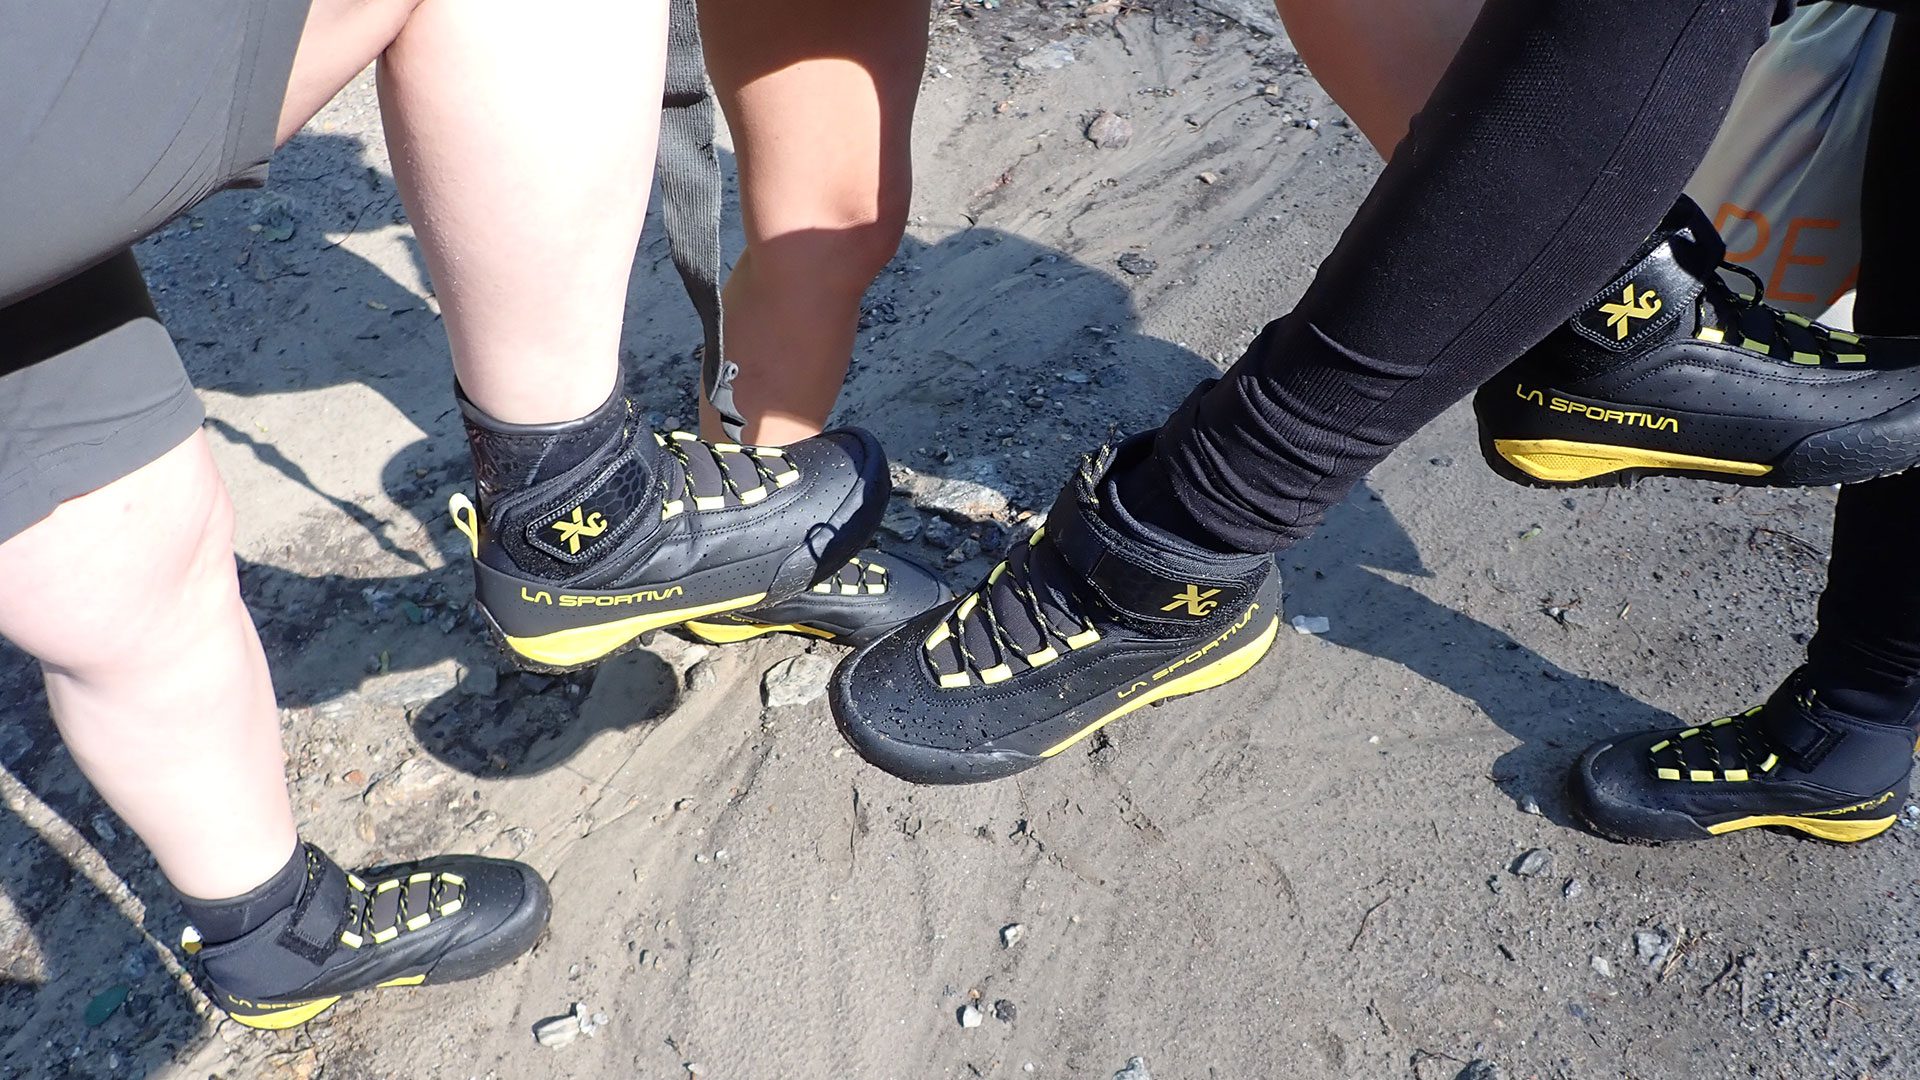 The new La sportiva canyoning boots